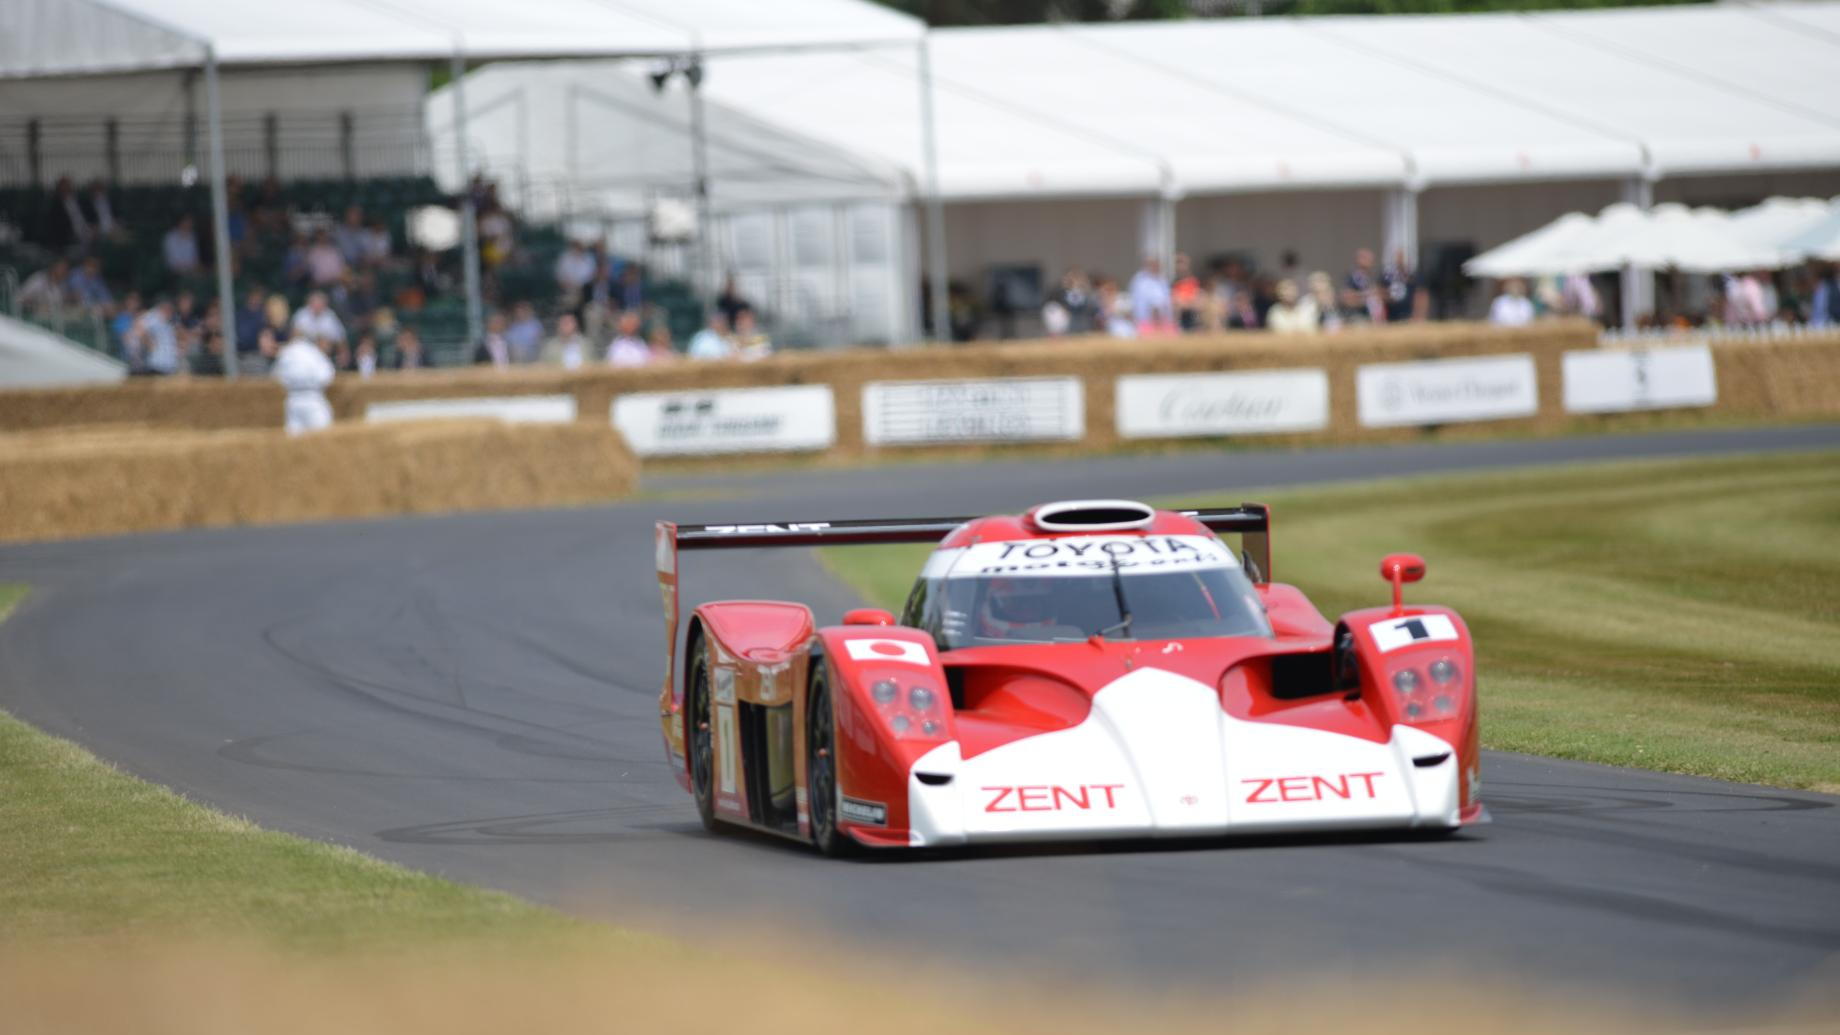 2013 Goodwood Festival of Speed lineup